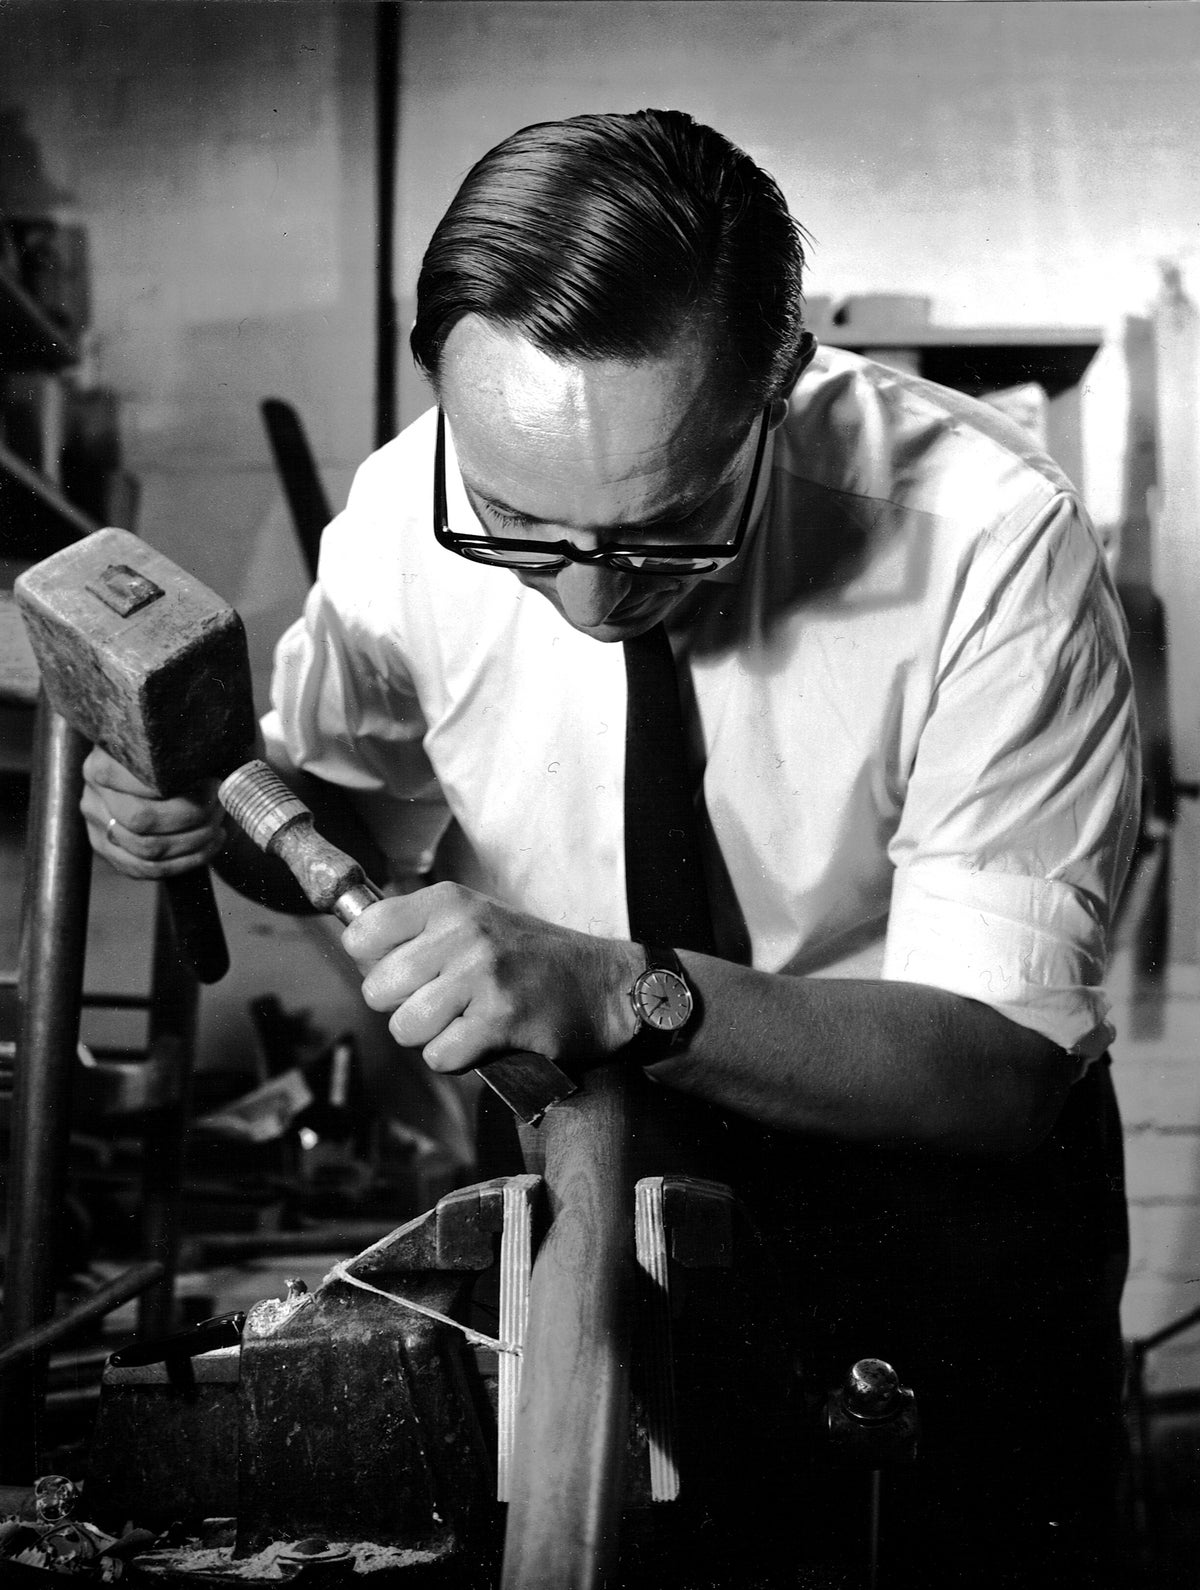 Black and white photo of designer with tools